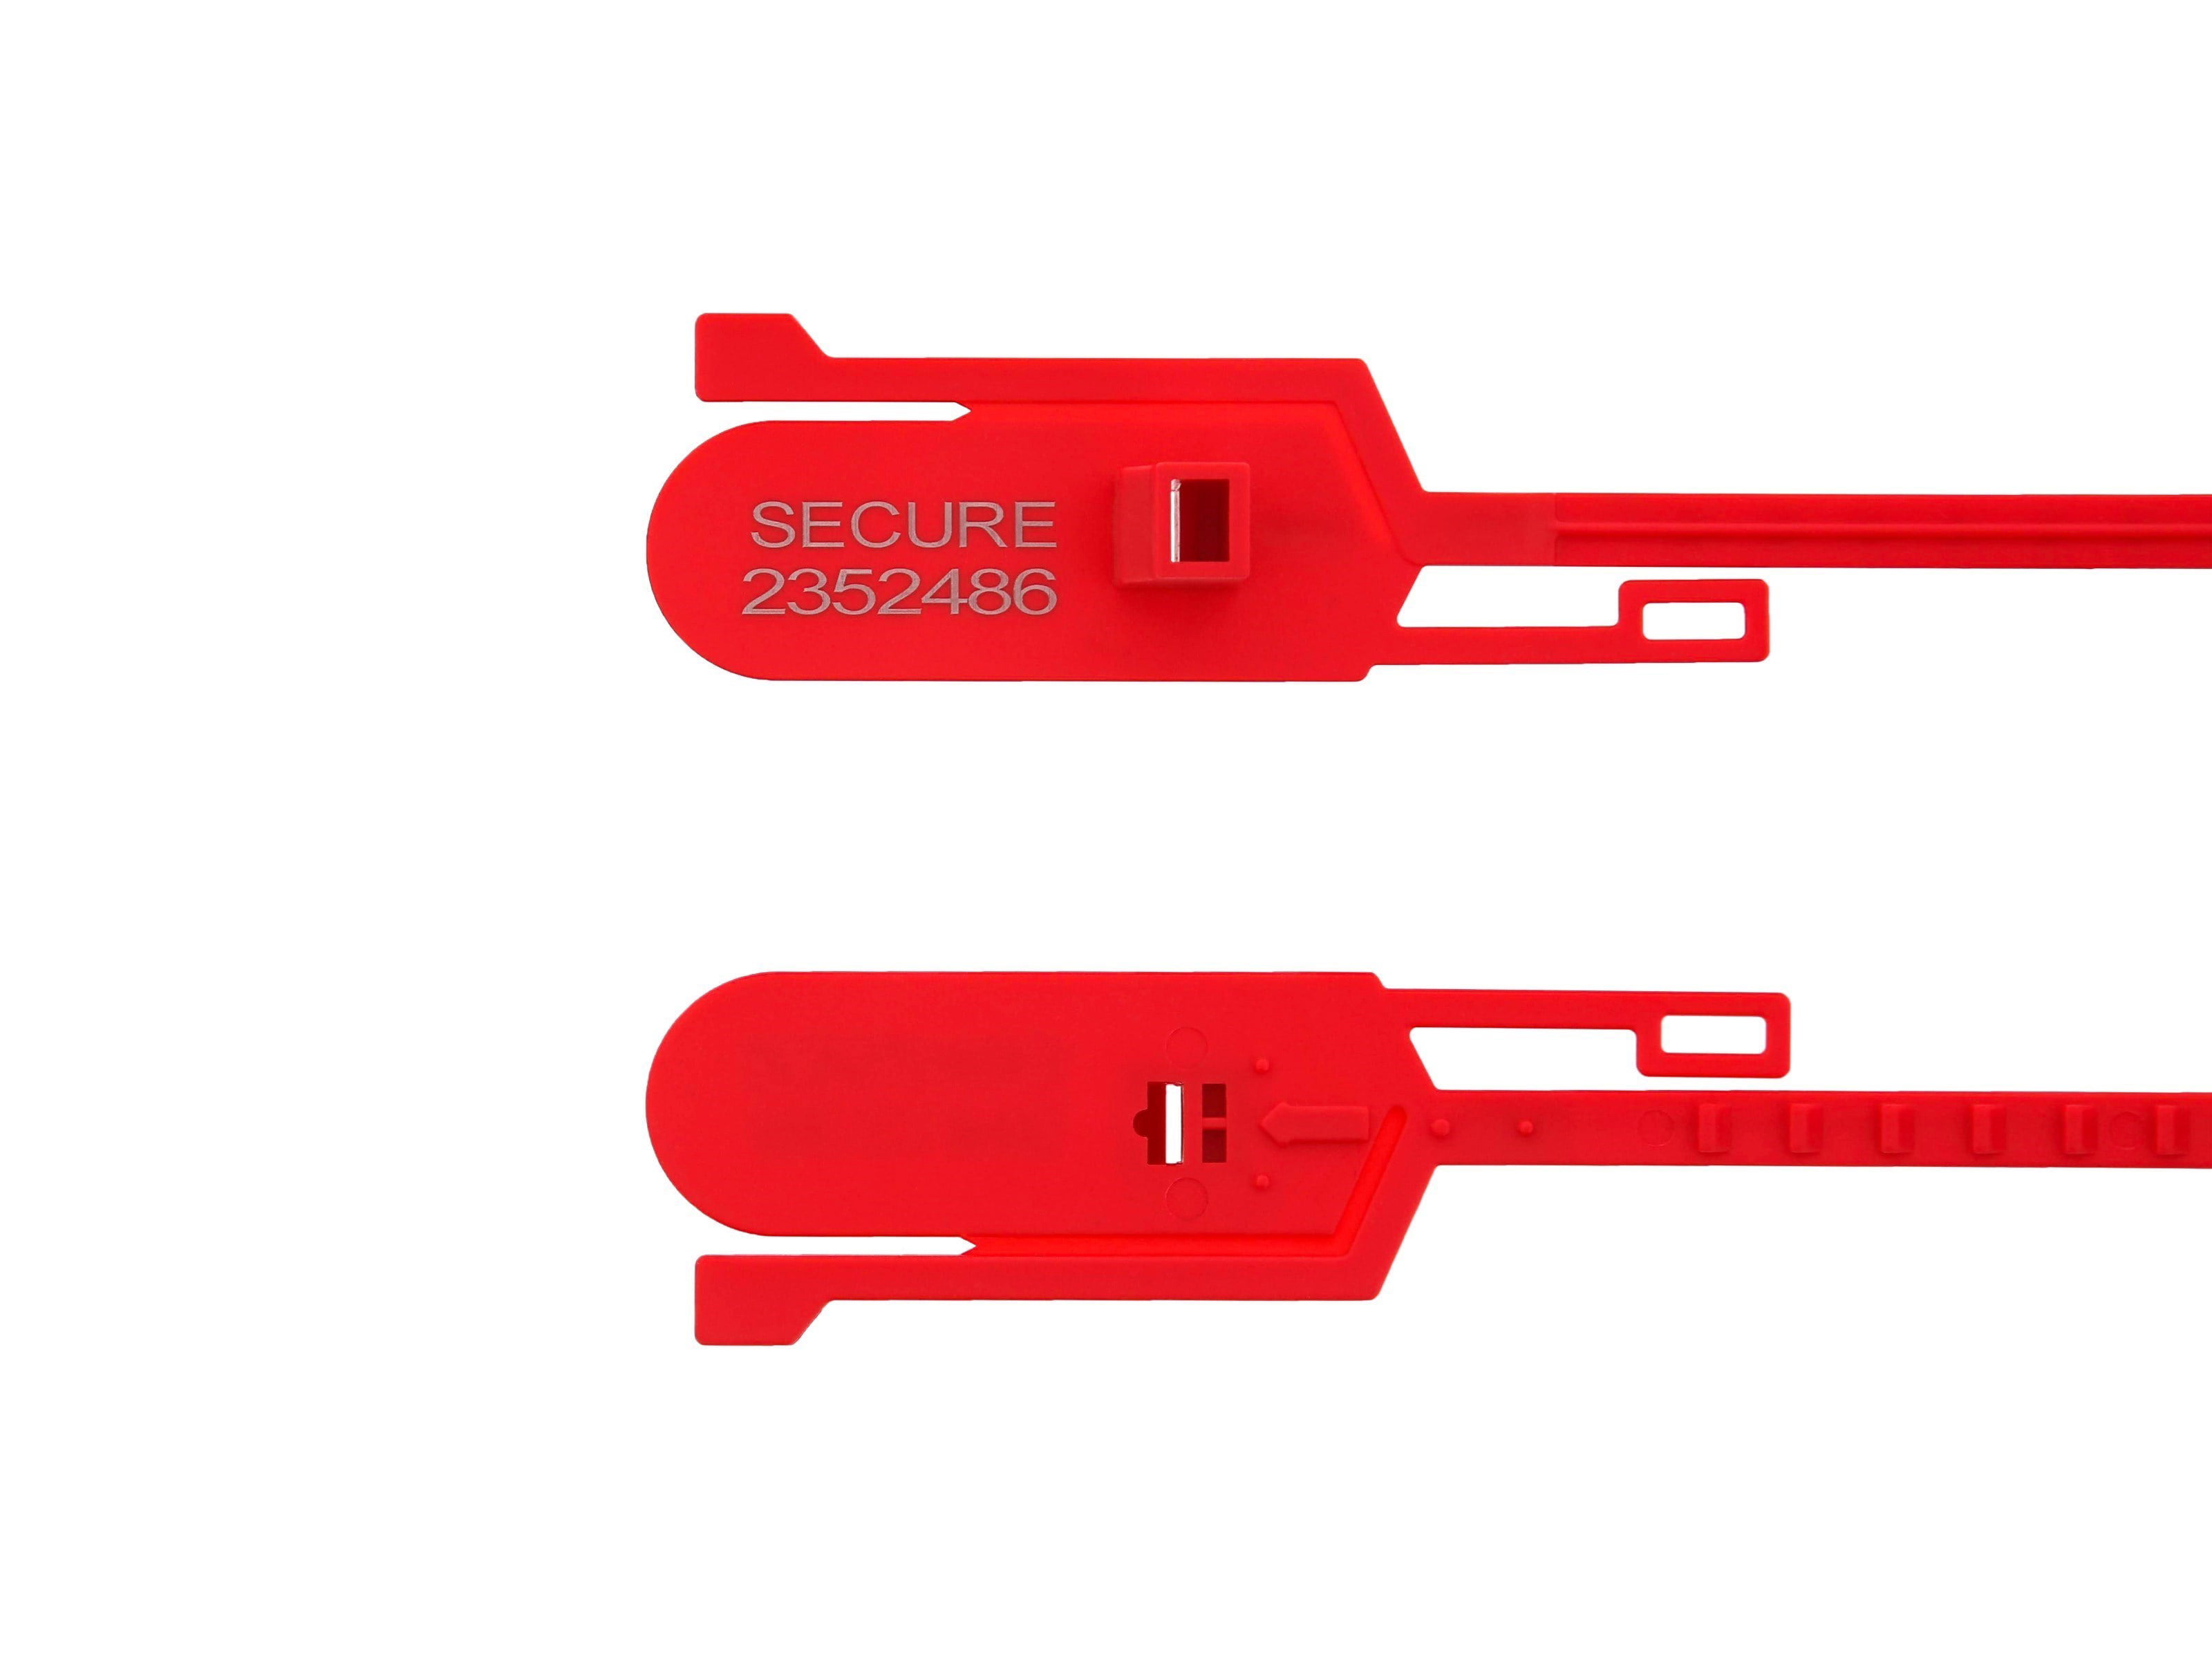 Red security tags numbered sequential pull ties luggage anti-tamper secure 